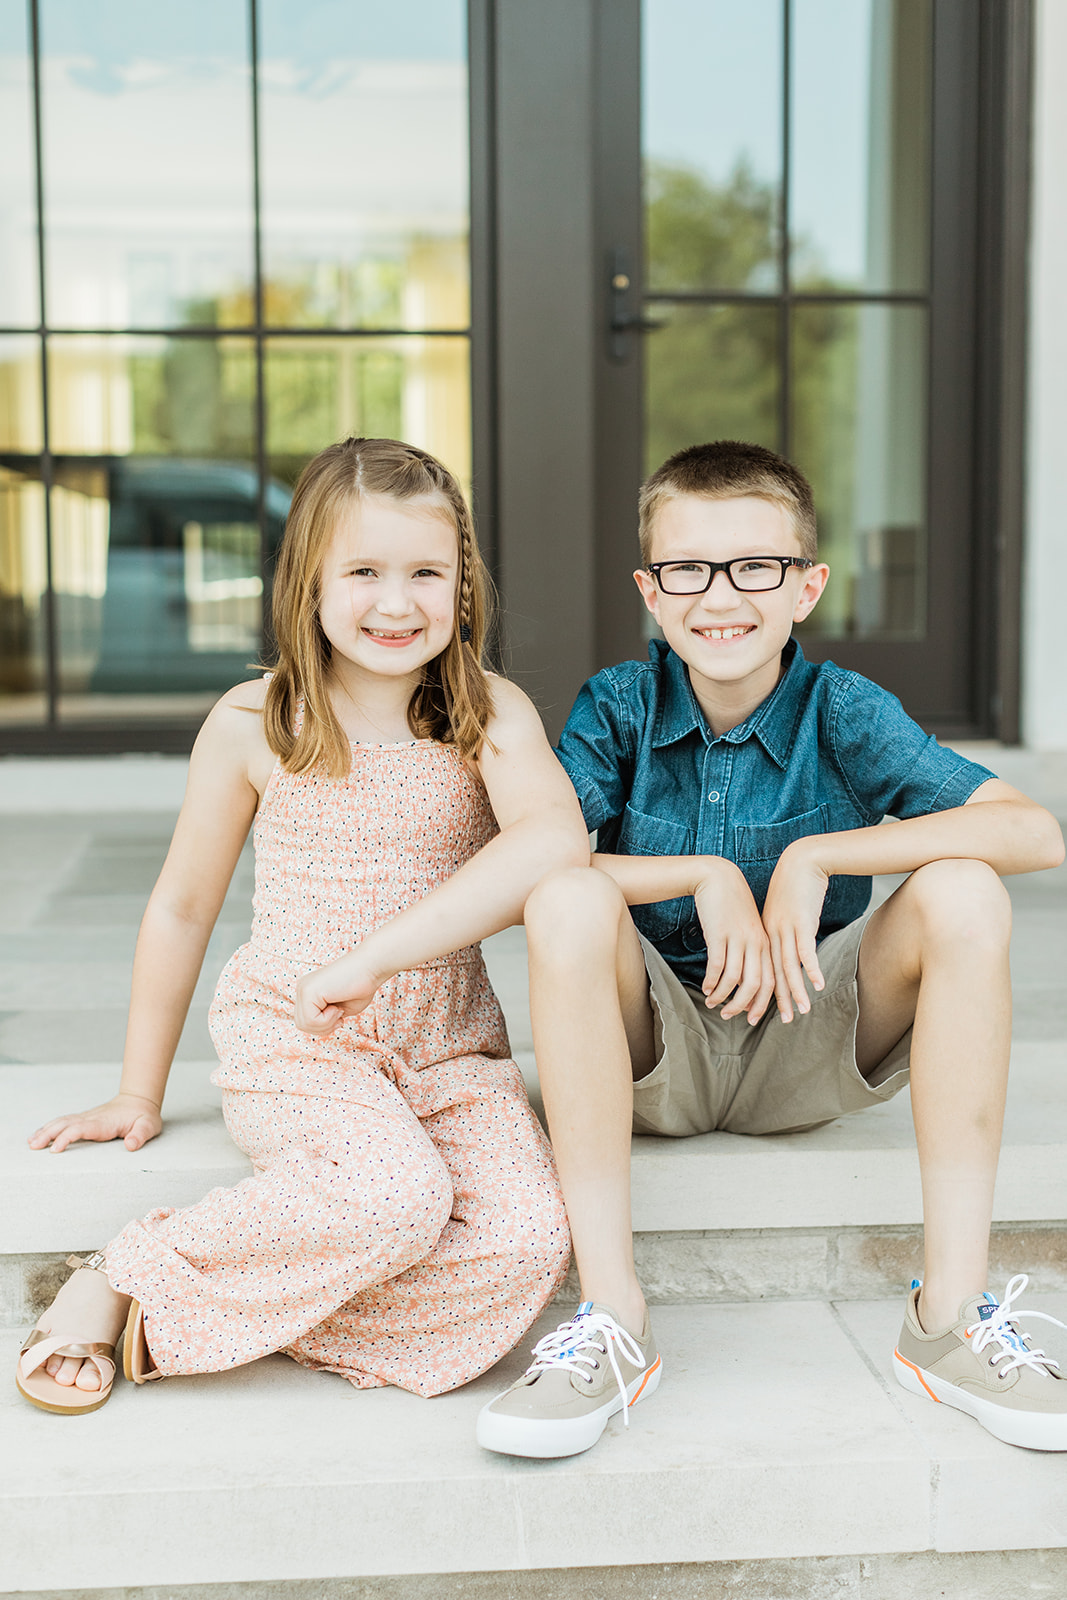 outdoor in-home family session in nashville tennessee. sister and brother photo